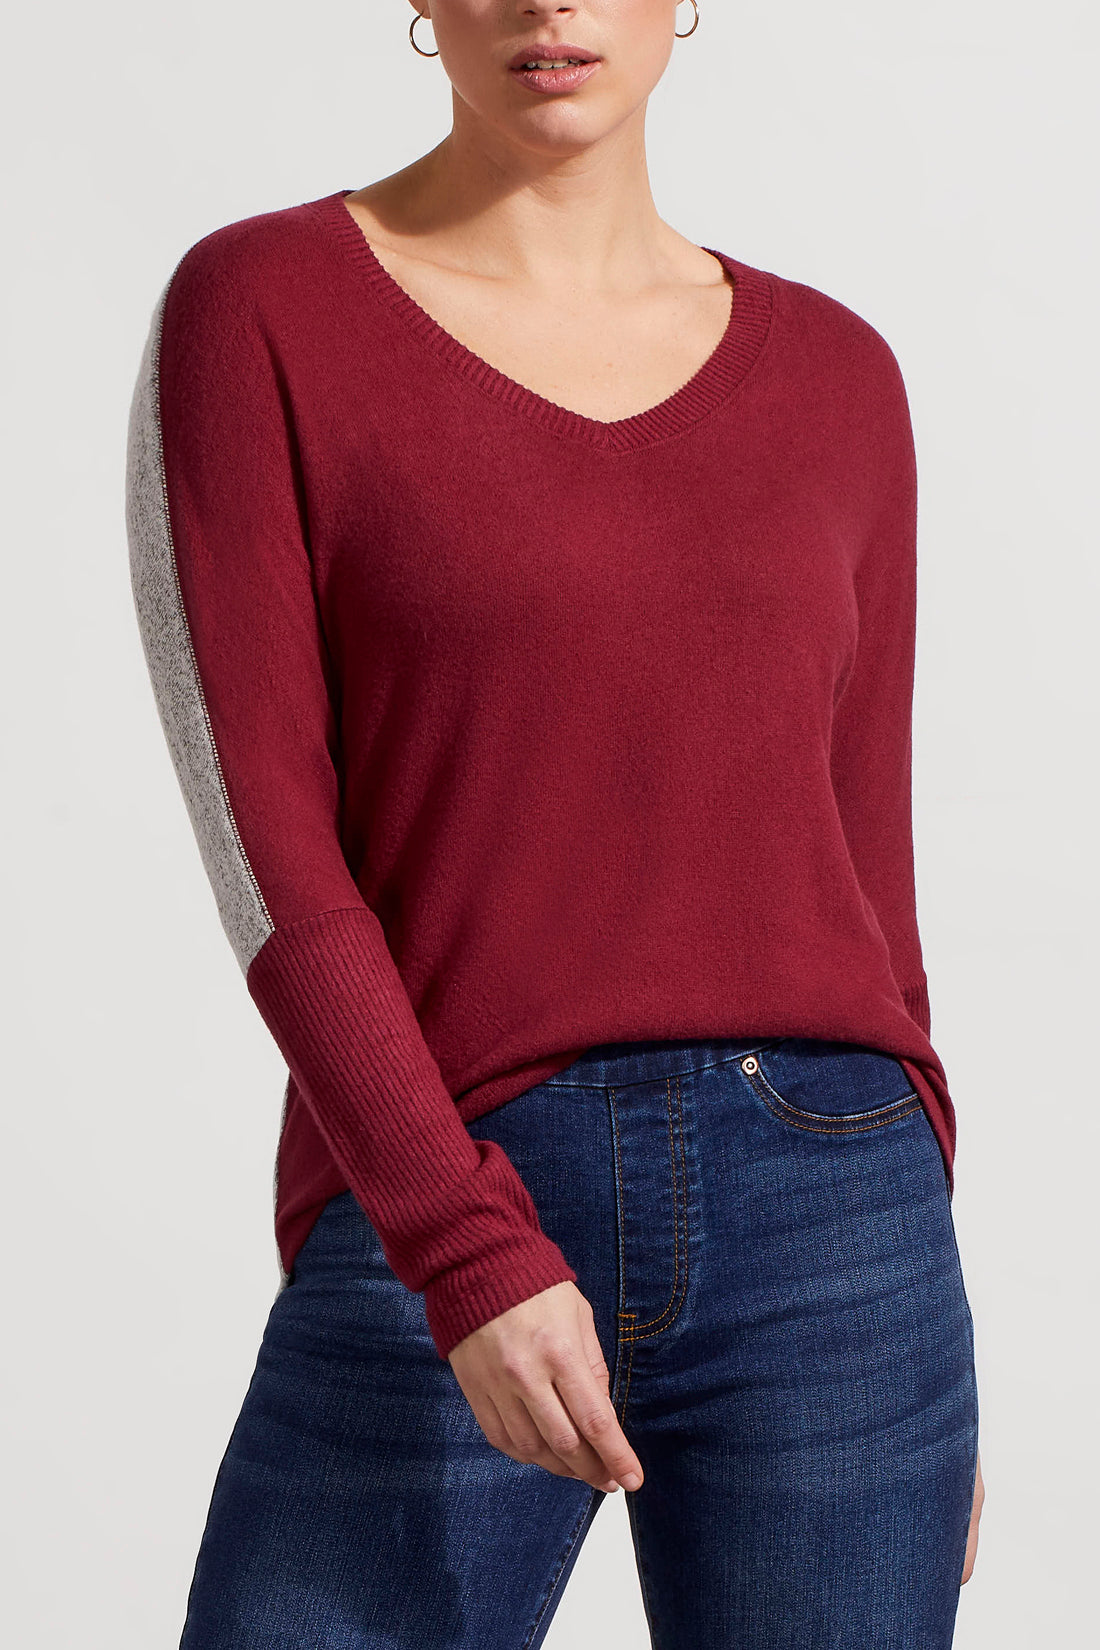 Longsleeve V-Neck Top Combo - TWO COLORS